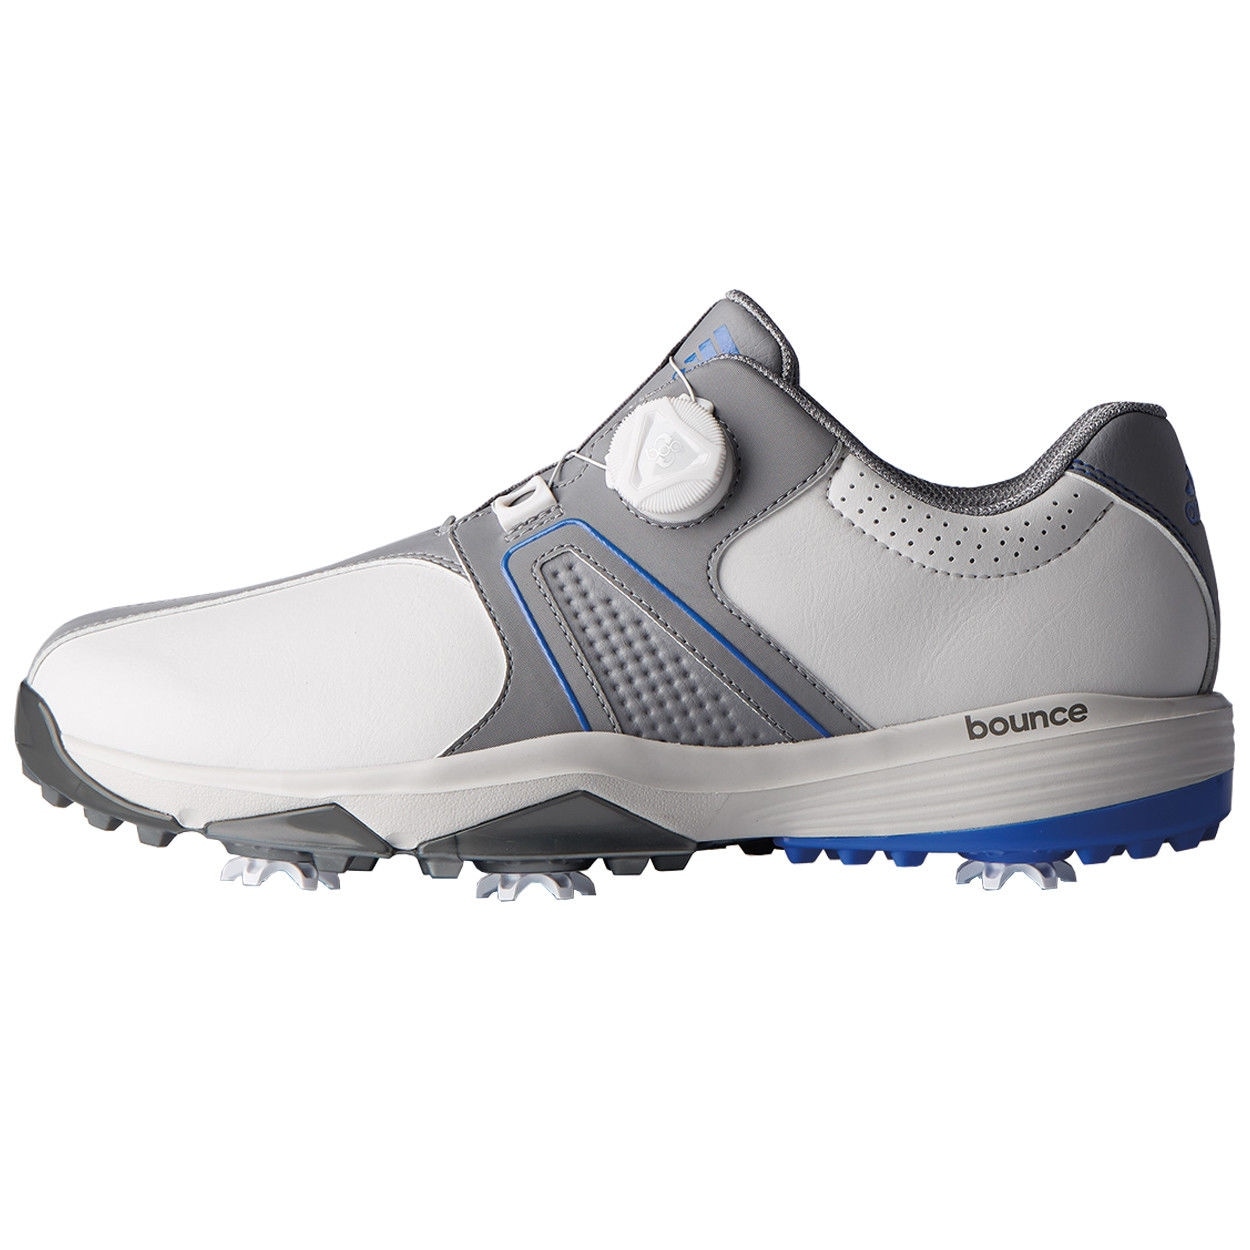 adidas 360 traxion bounce golf shoes